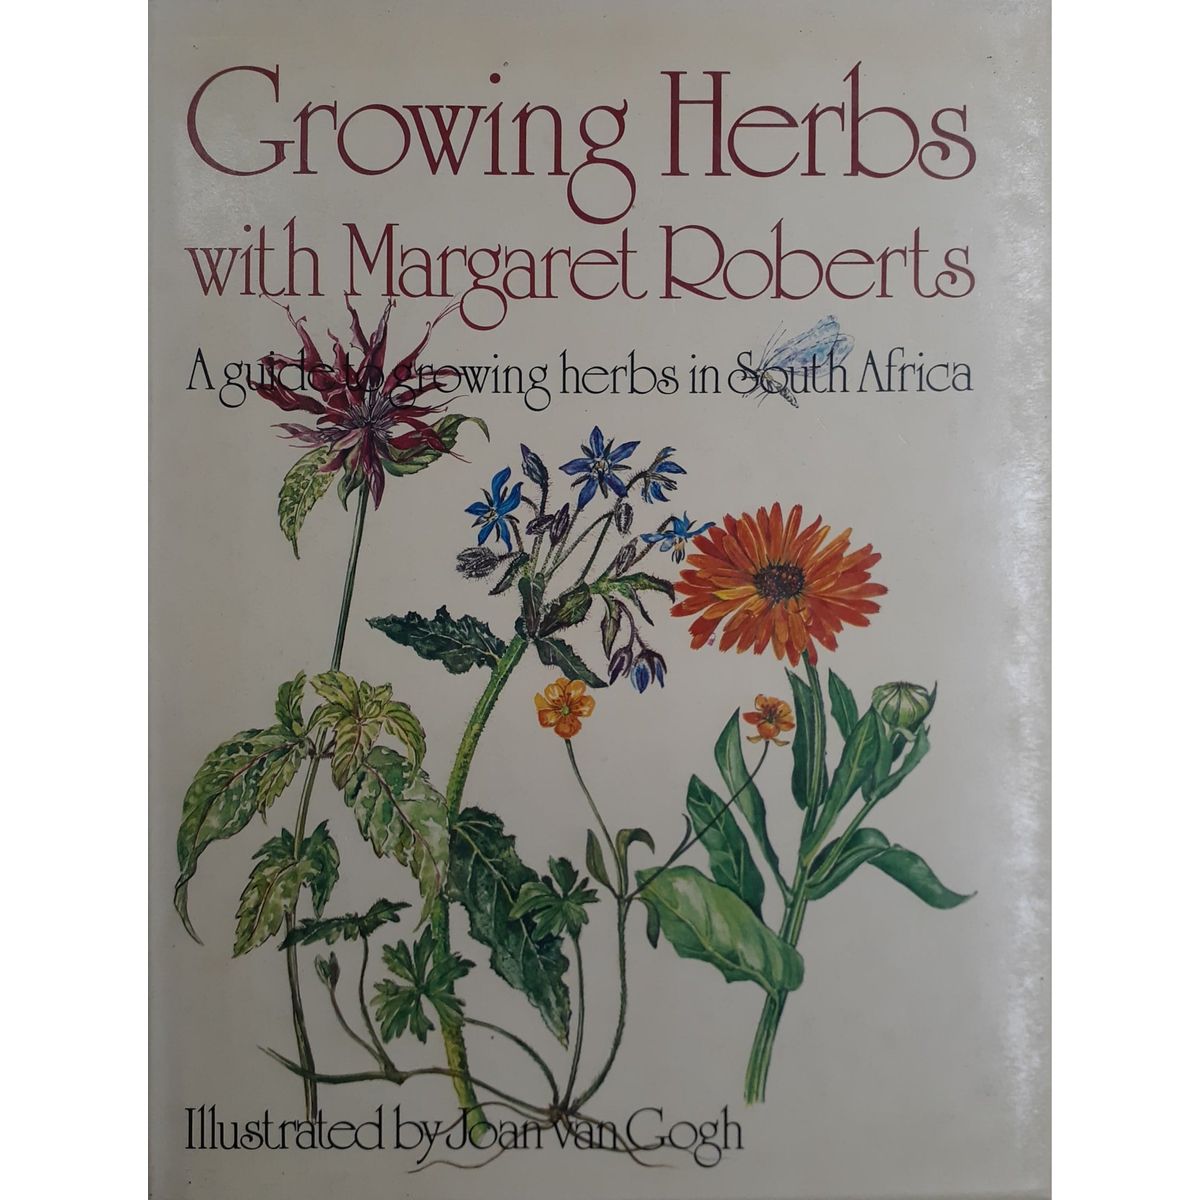 ISBN: 9780868501055 / 0868501050 - Growing Herbs with Margaret Roberts: A Guide to Growing Herbs in South Africa [1985]